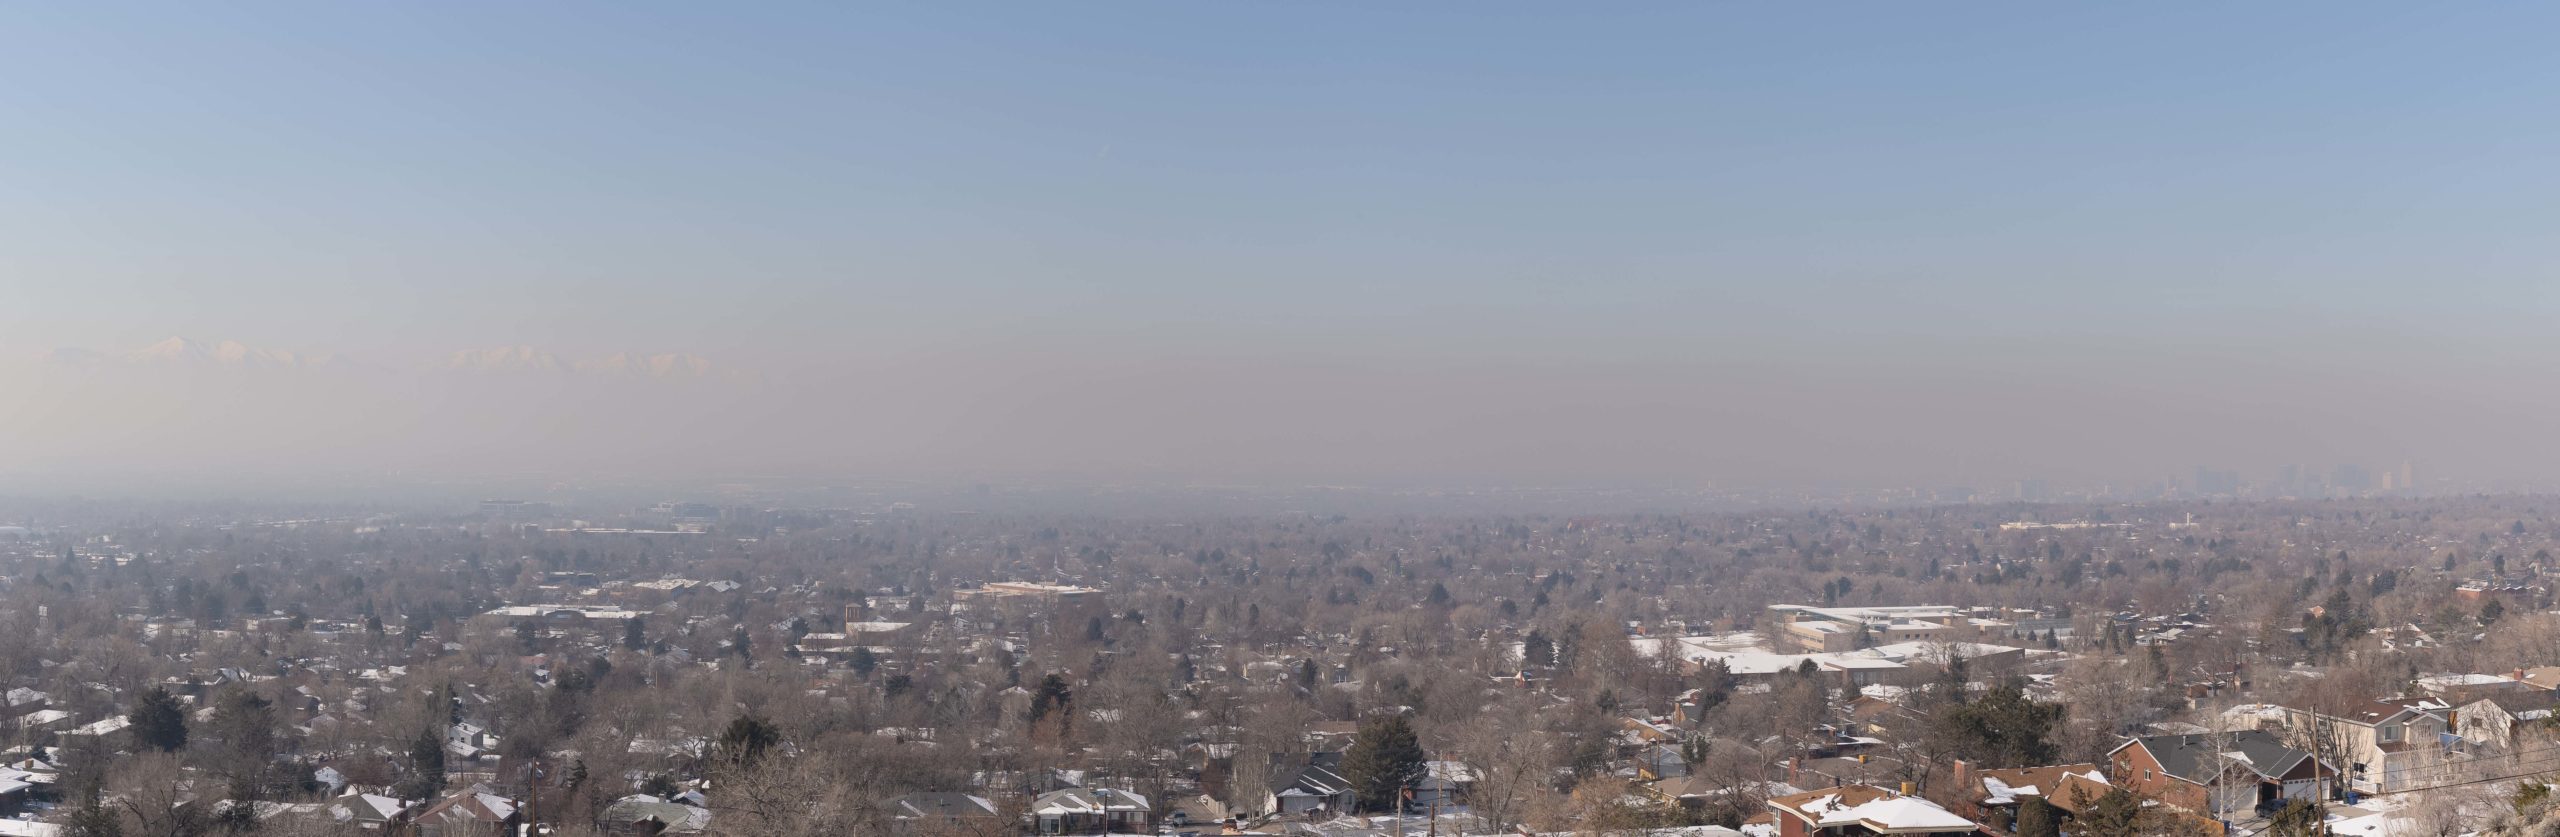 View from the foothills of Salt Lake City toward the western mountains and downtown showing the haze from inversion.